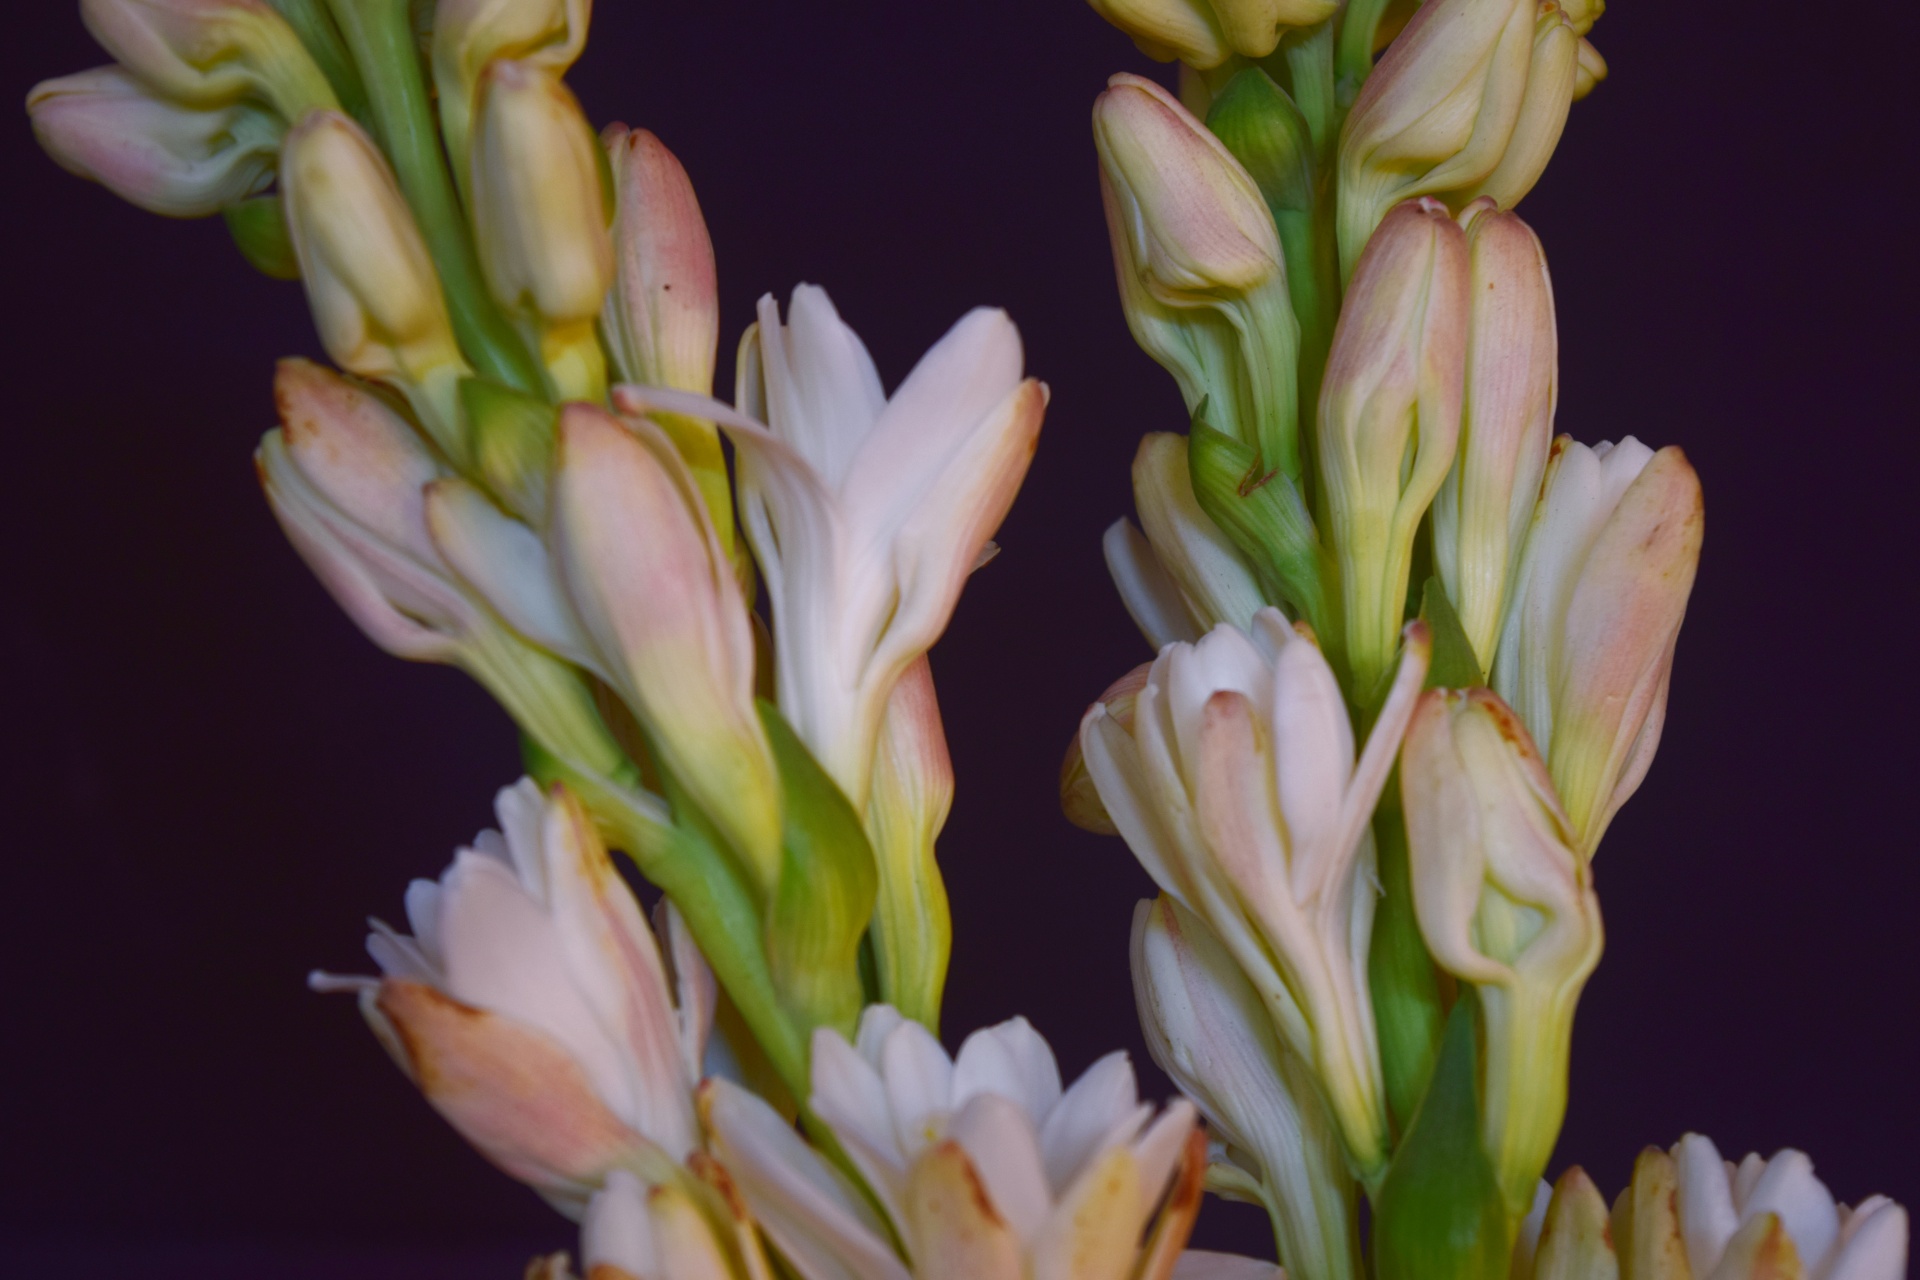 polianthes flower buds free photo